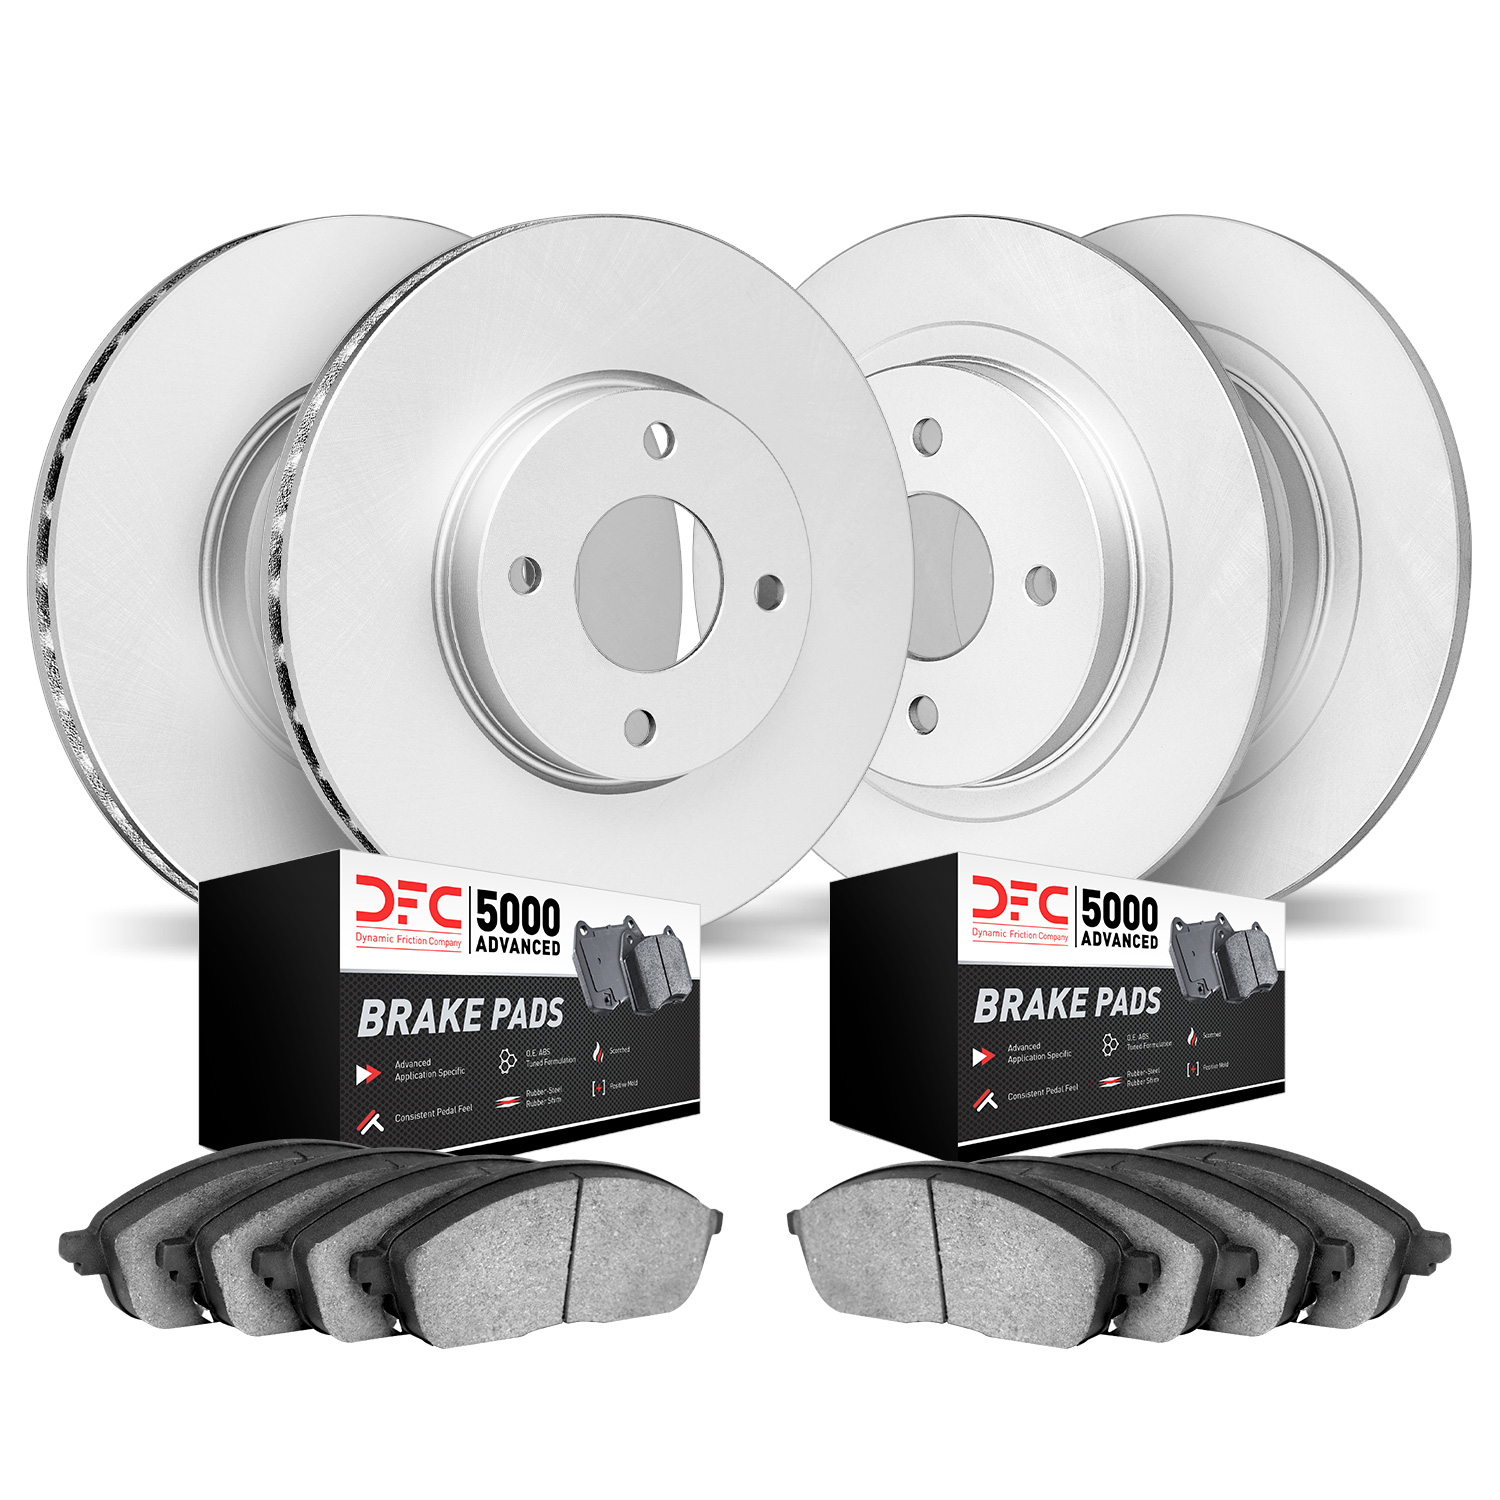 4504-54220 Geospec Brake Rotors w/5000 Advanced Brake Pads Kit, 2005-2007 Ford/Lincoln/Mercury/Mazda, Position: Front and Rear